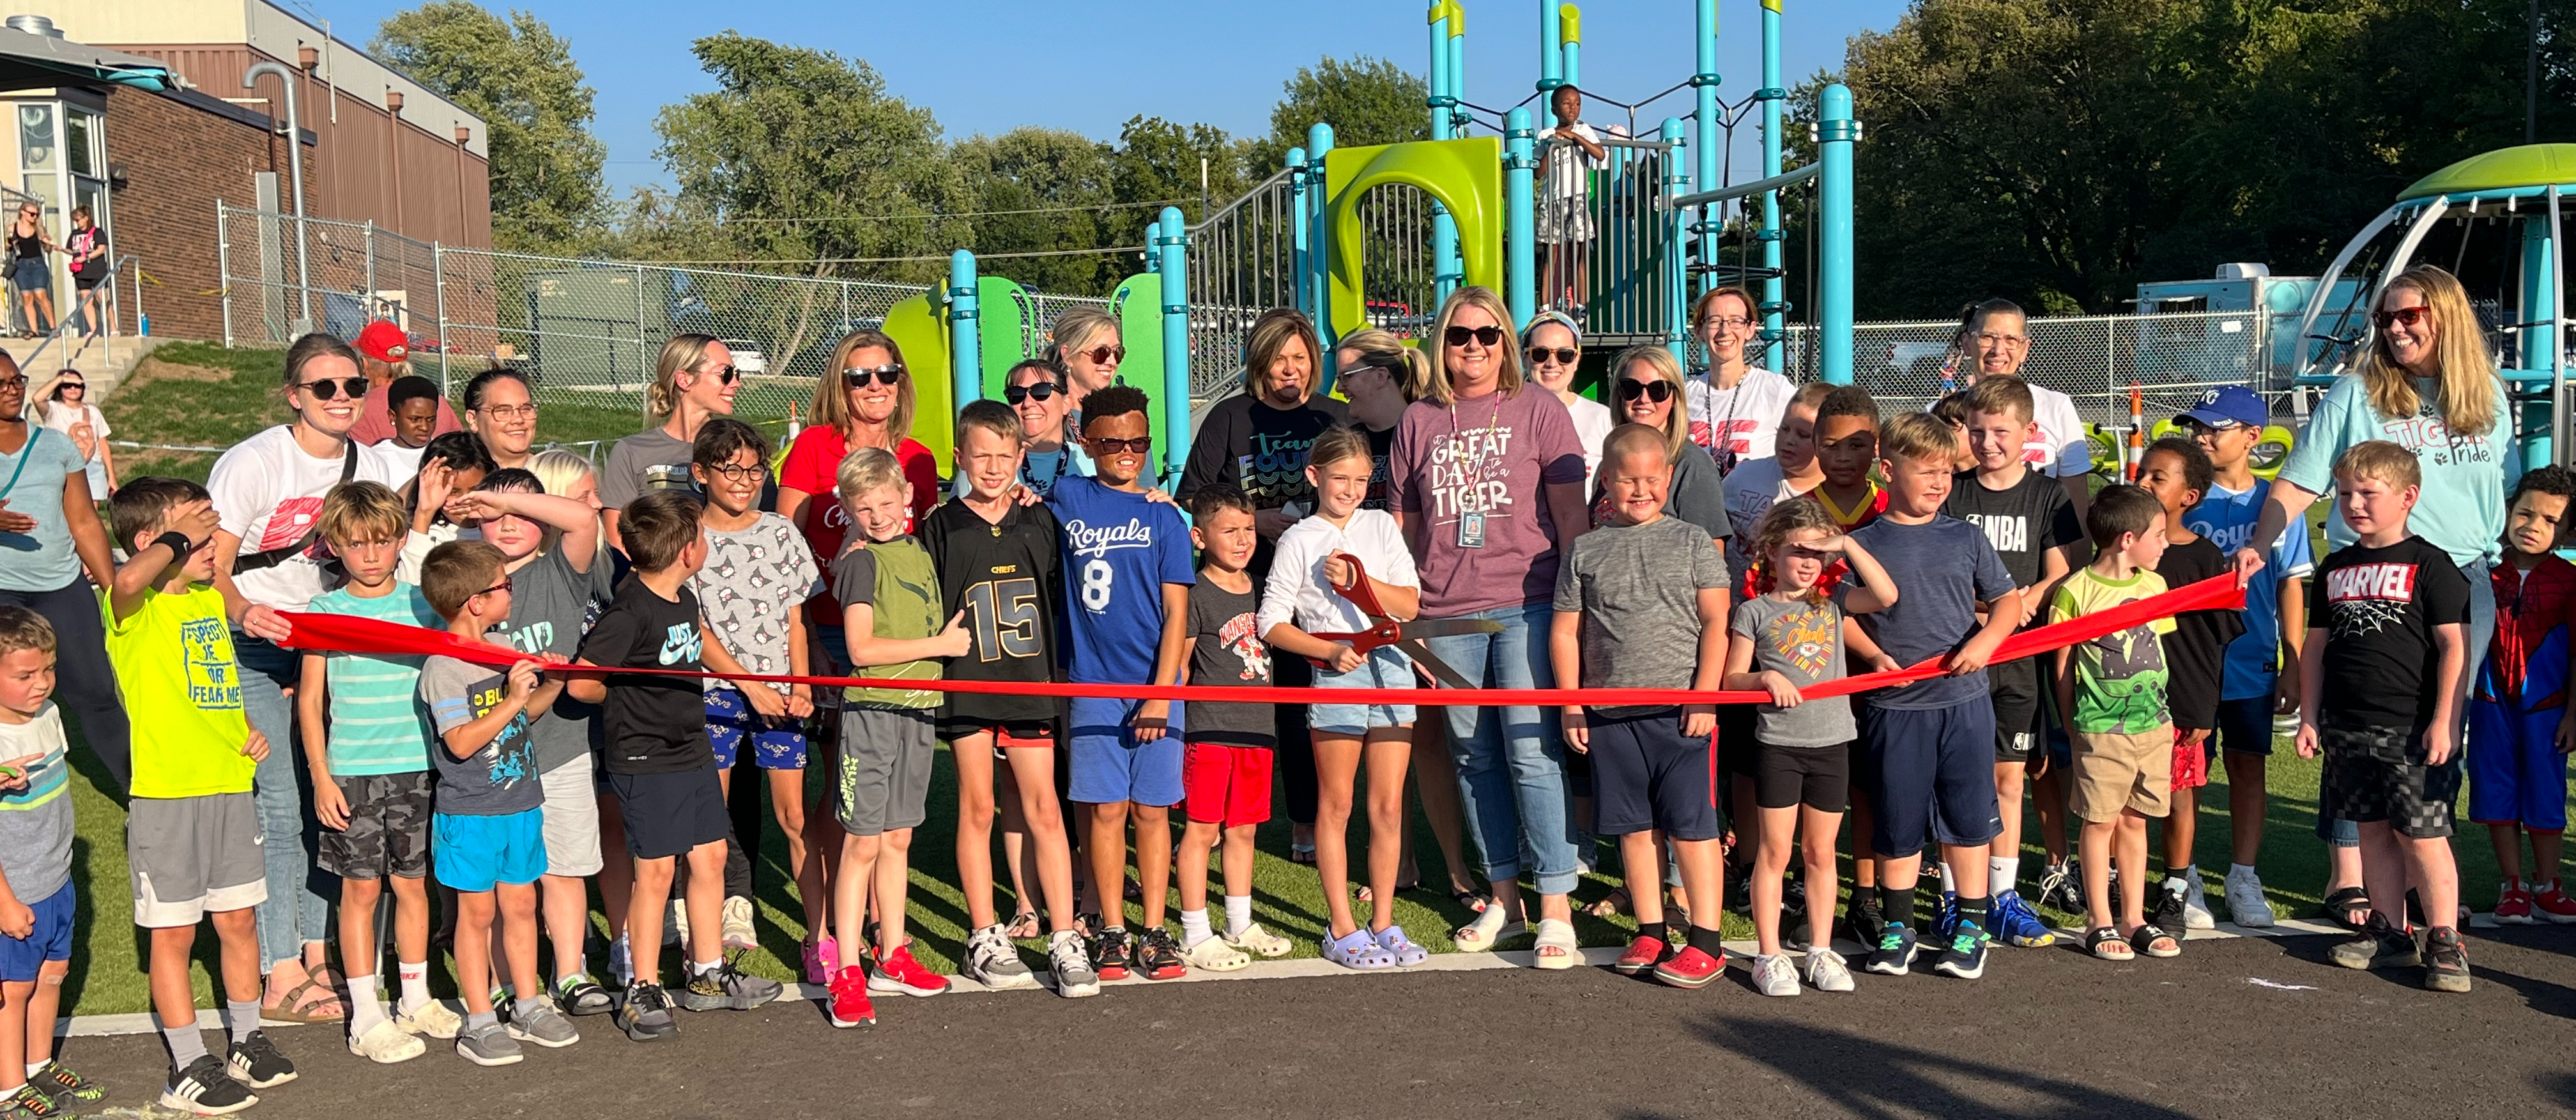 Ribbon Cutting at the new playground